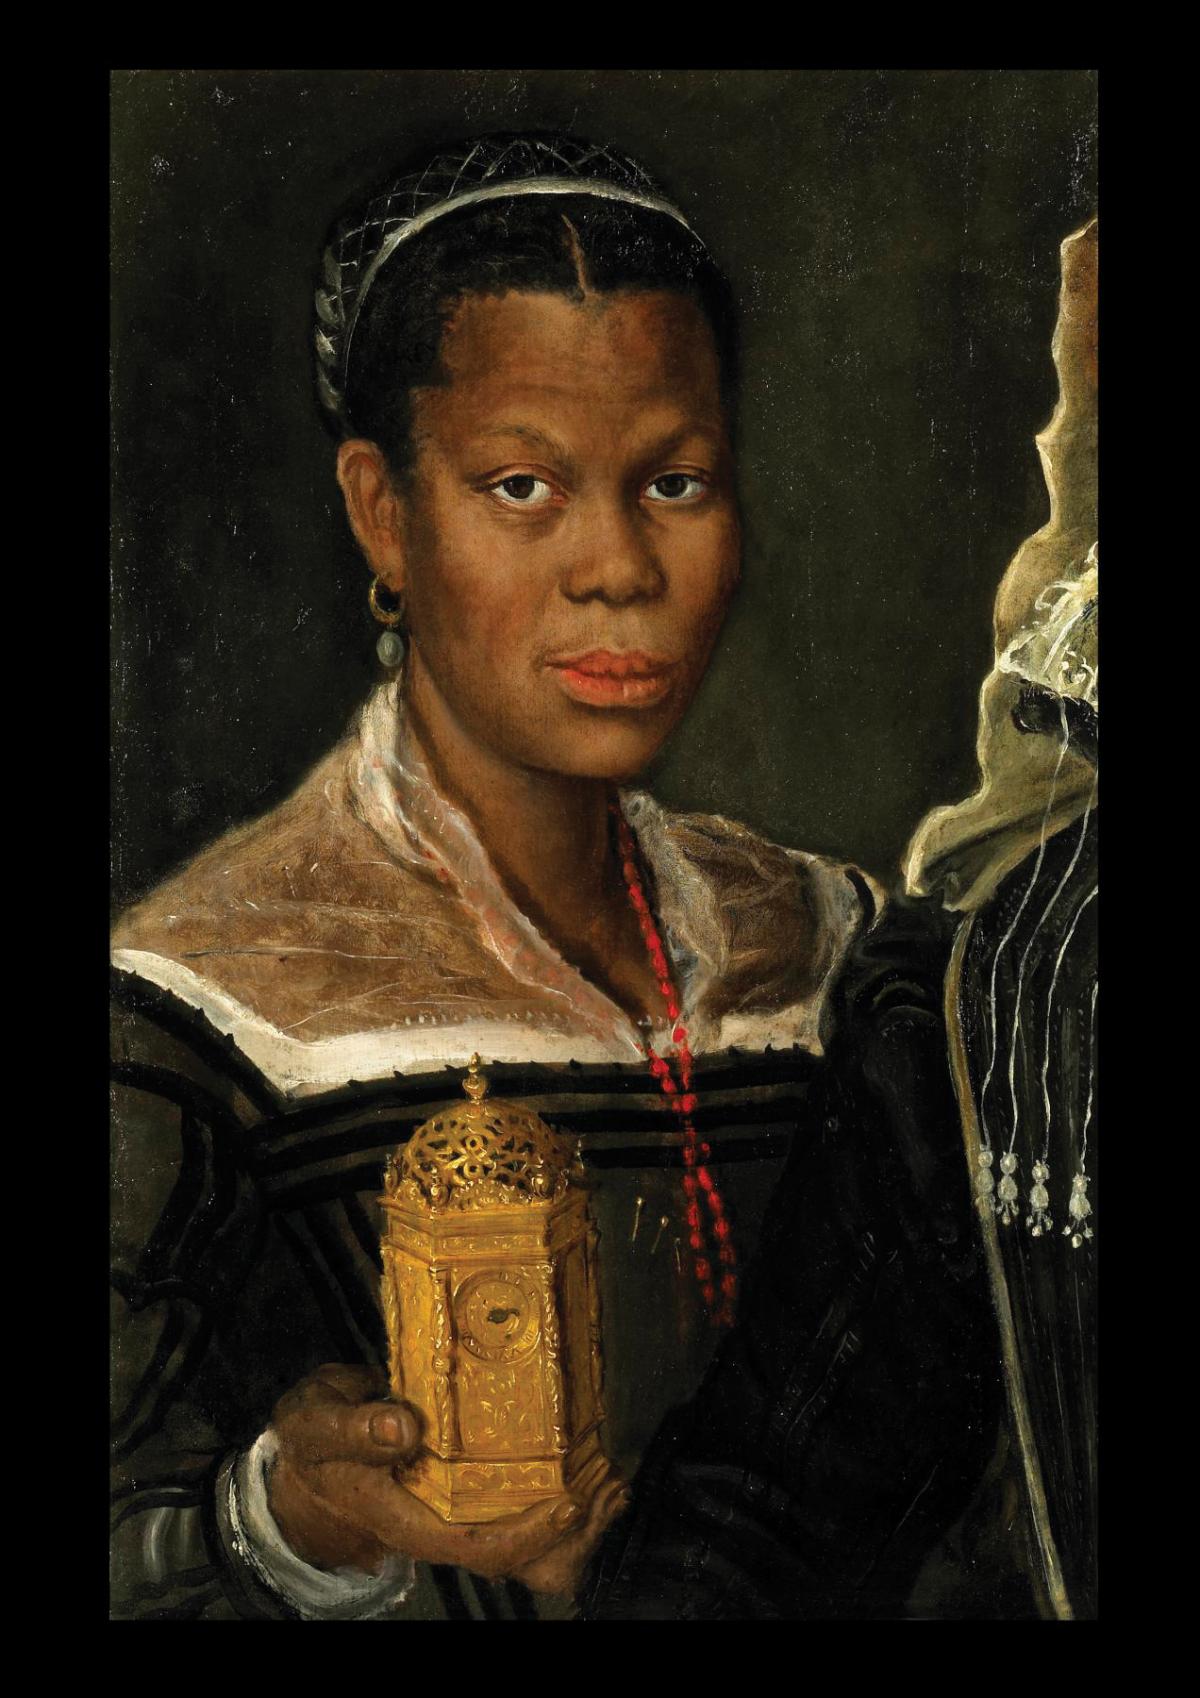 An African woman in a black dress with lace collar, holding a small gold clock tower